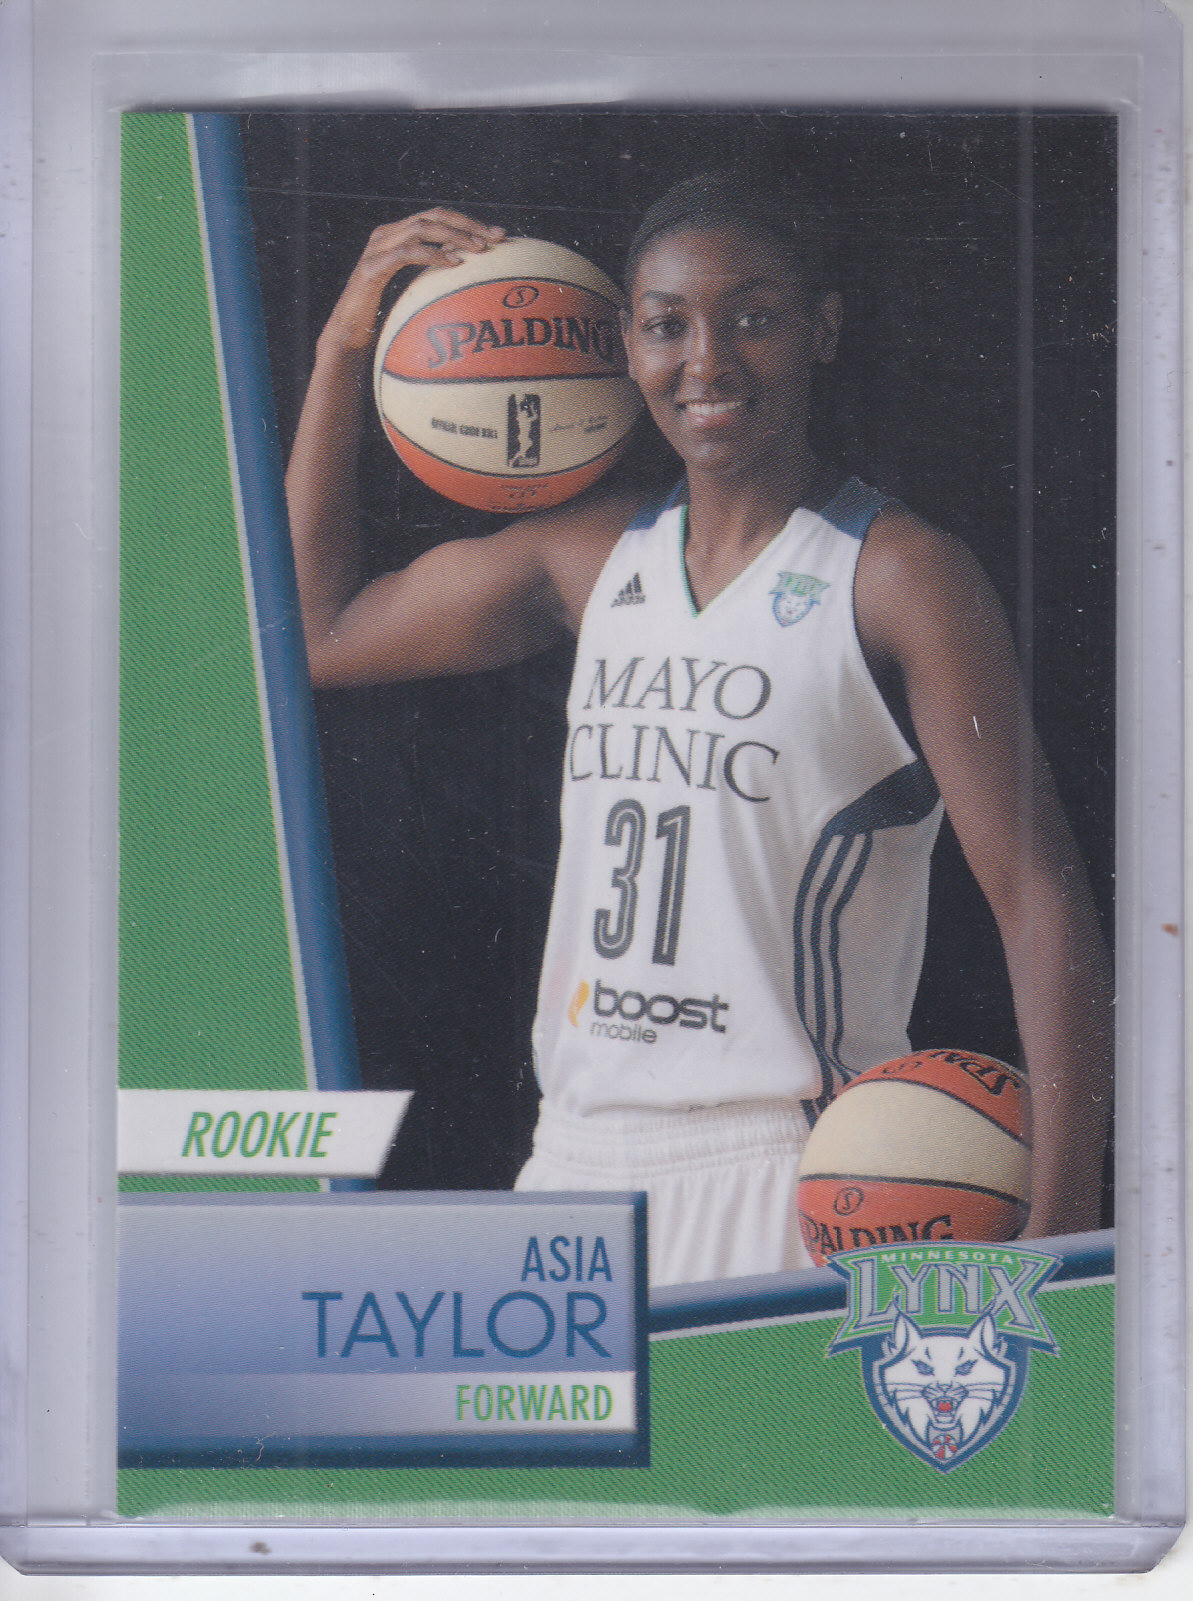  Asia Taylor player image